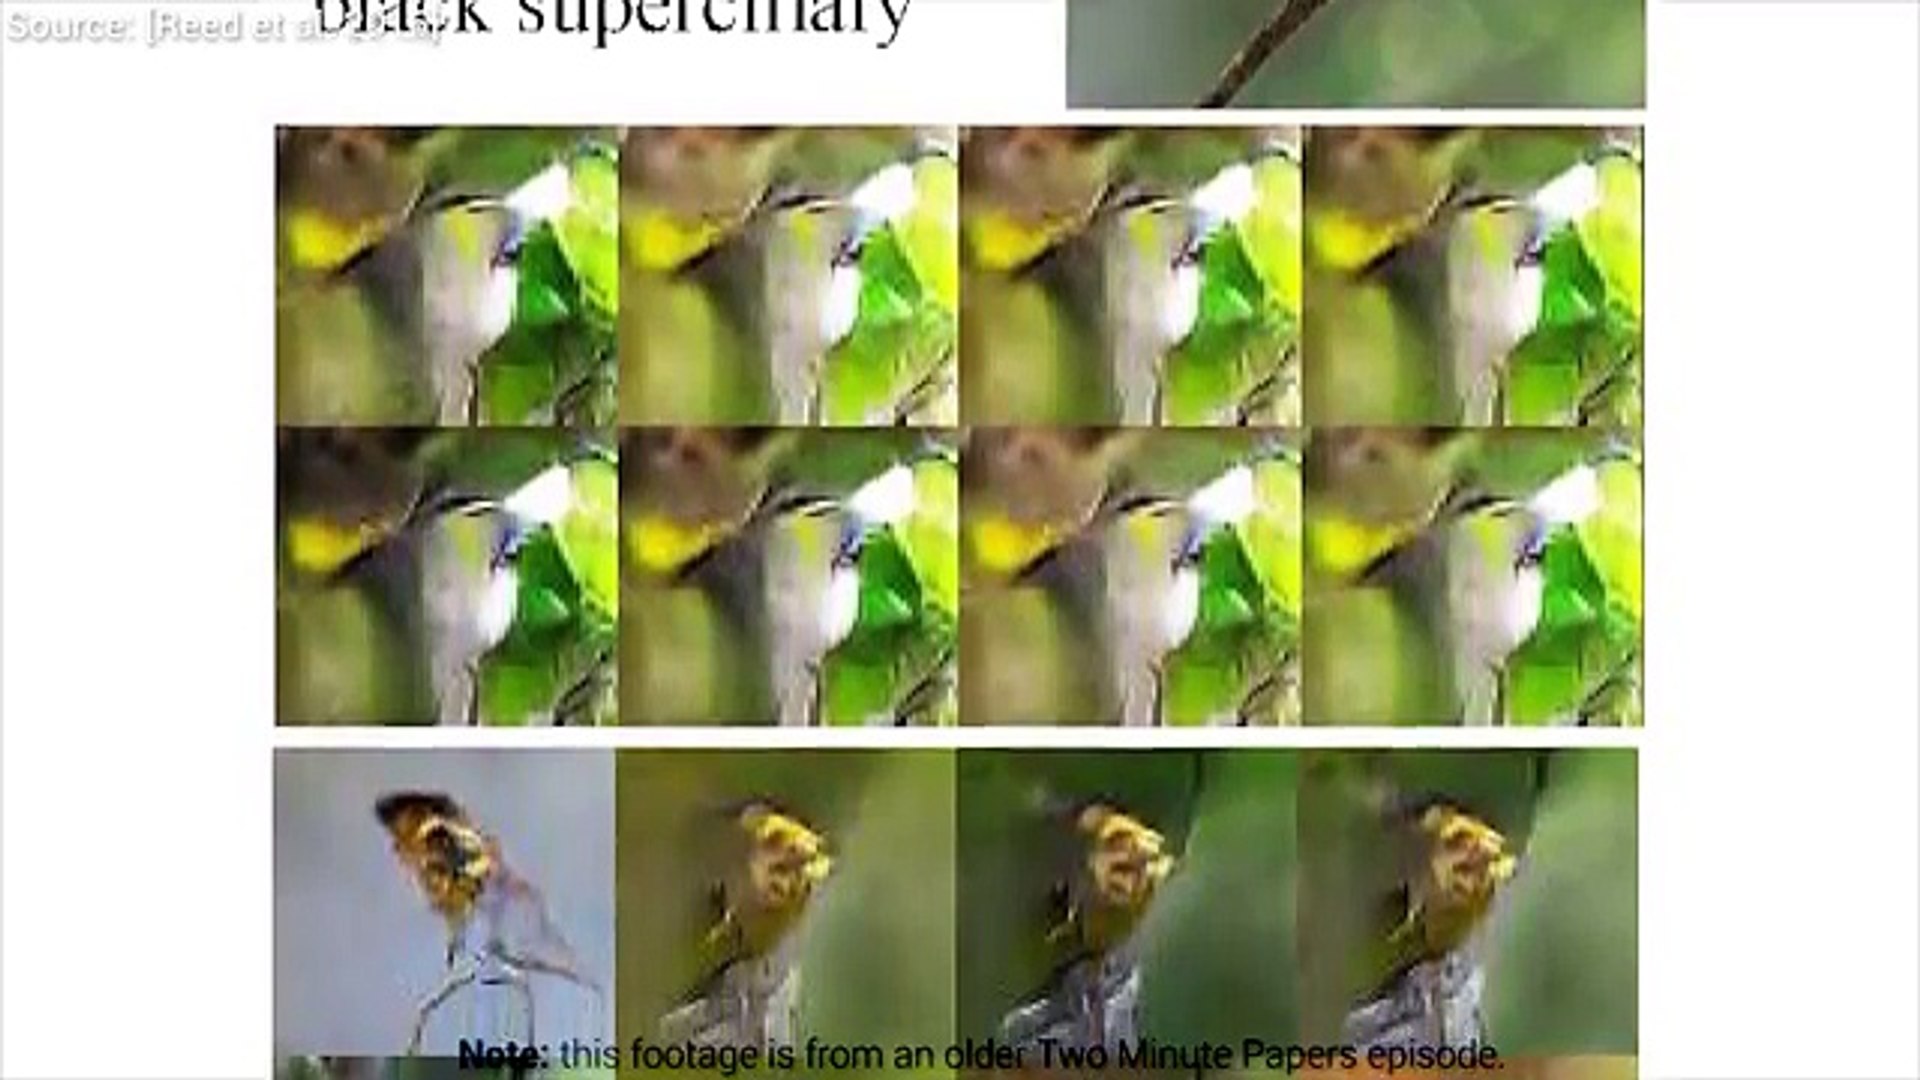 Image Synthesis From Text With Deep Learning | Two Minute Papers #116